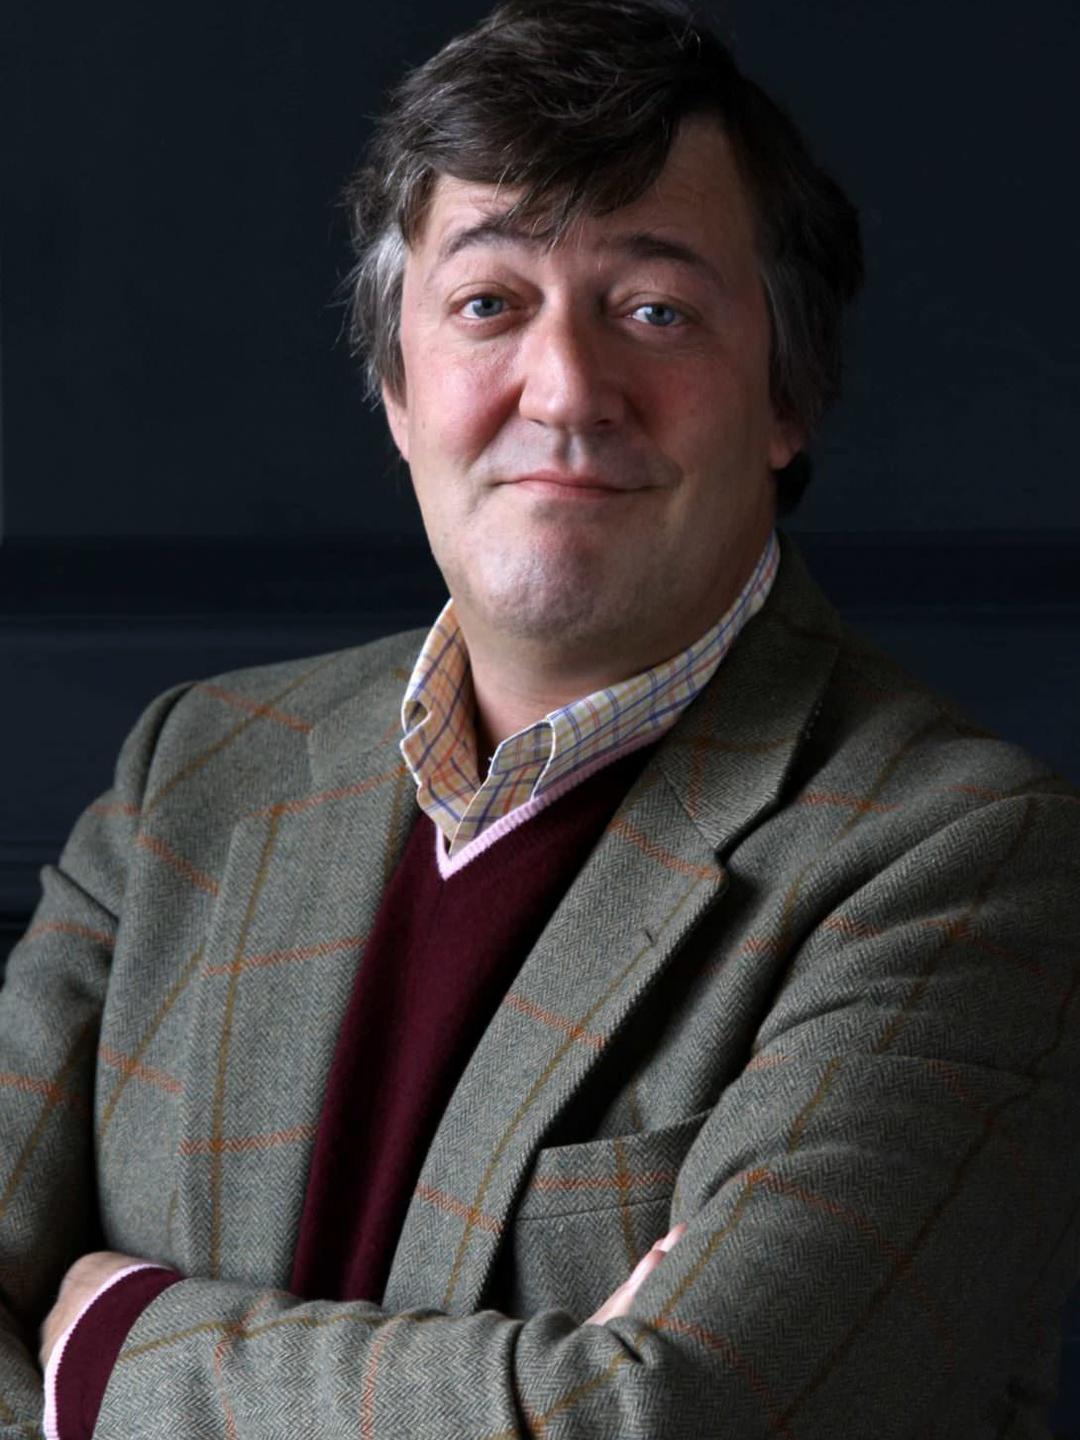 Stephen Fry in real life